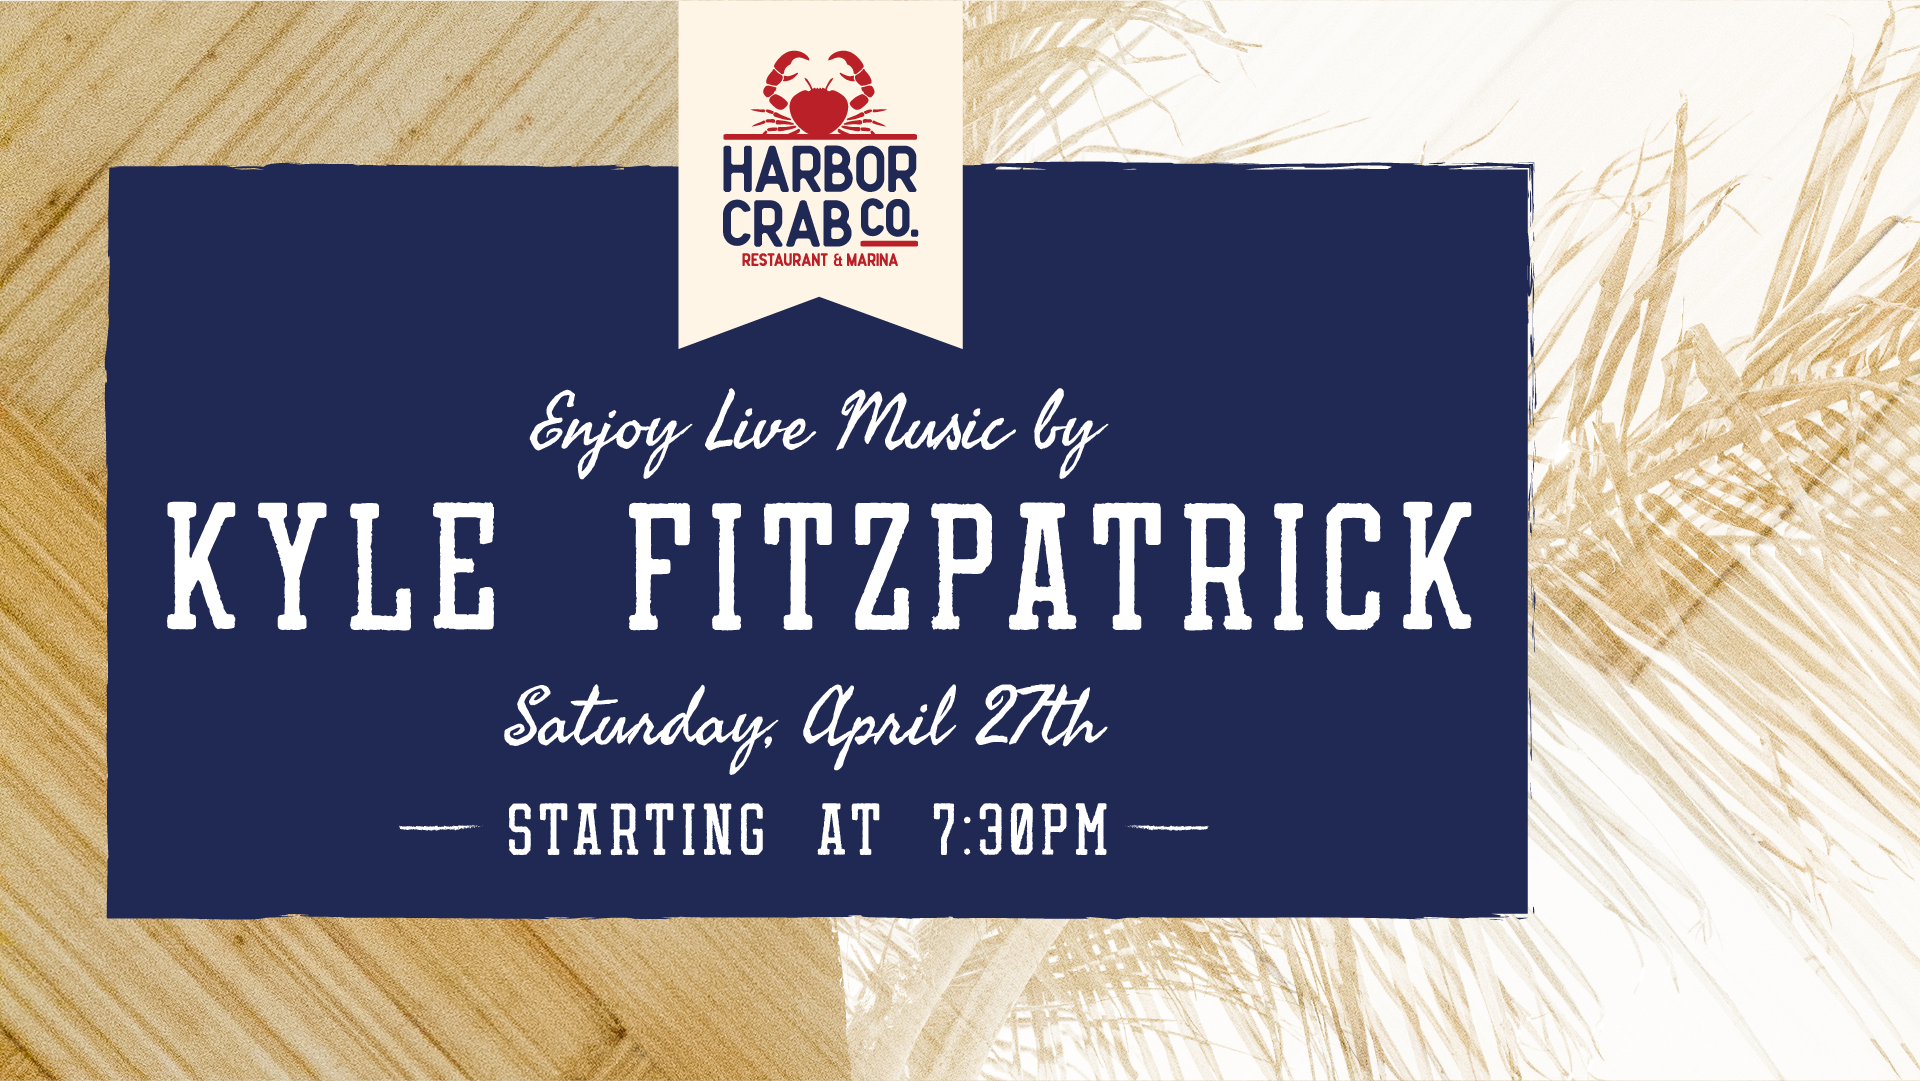 Live music by Kyle Fitzpatrick on Saturday, April 27 at 7:30PM at Harbor Crab.